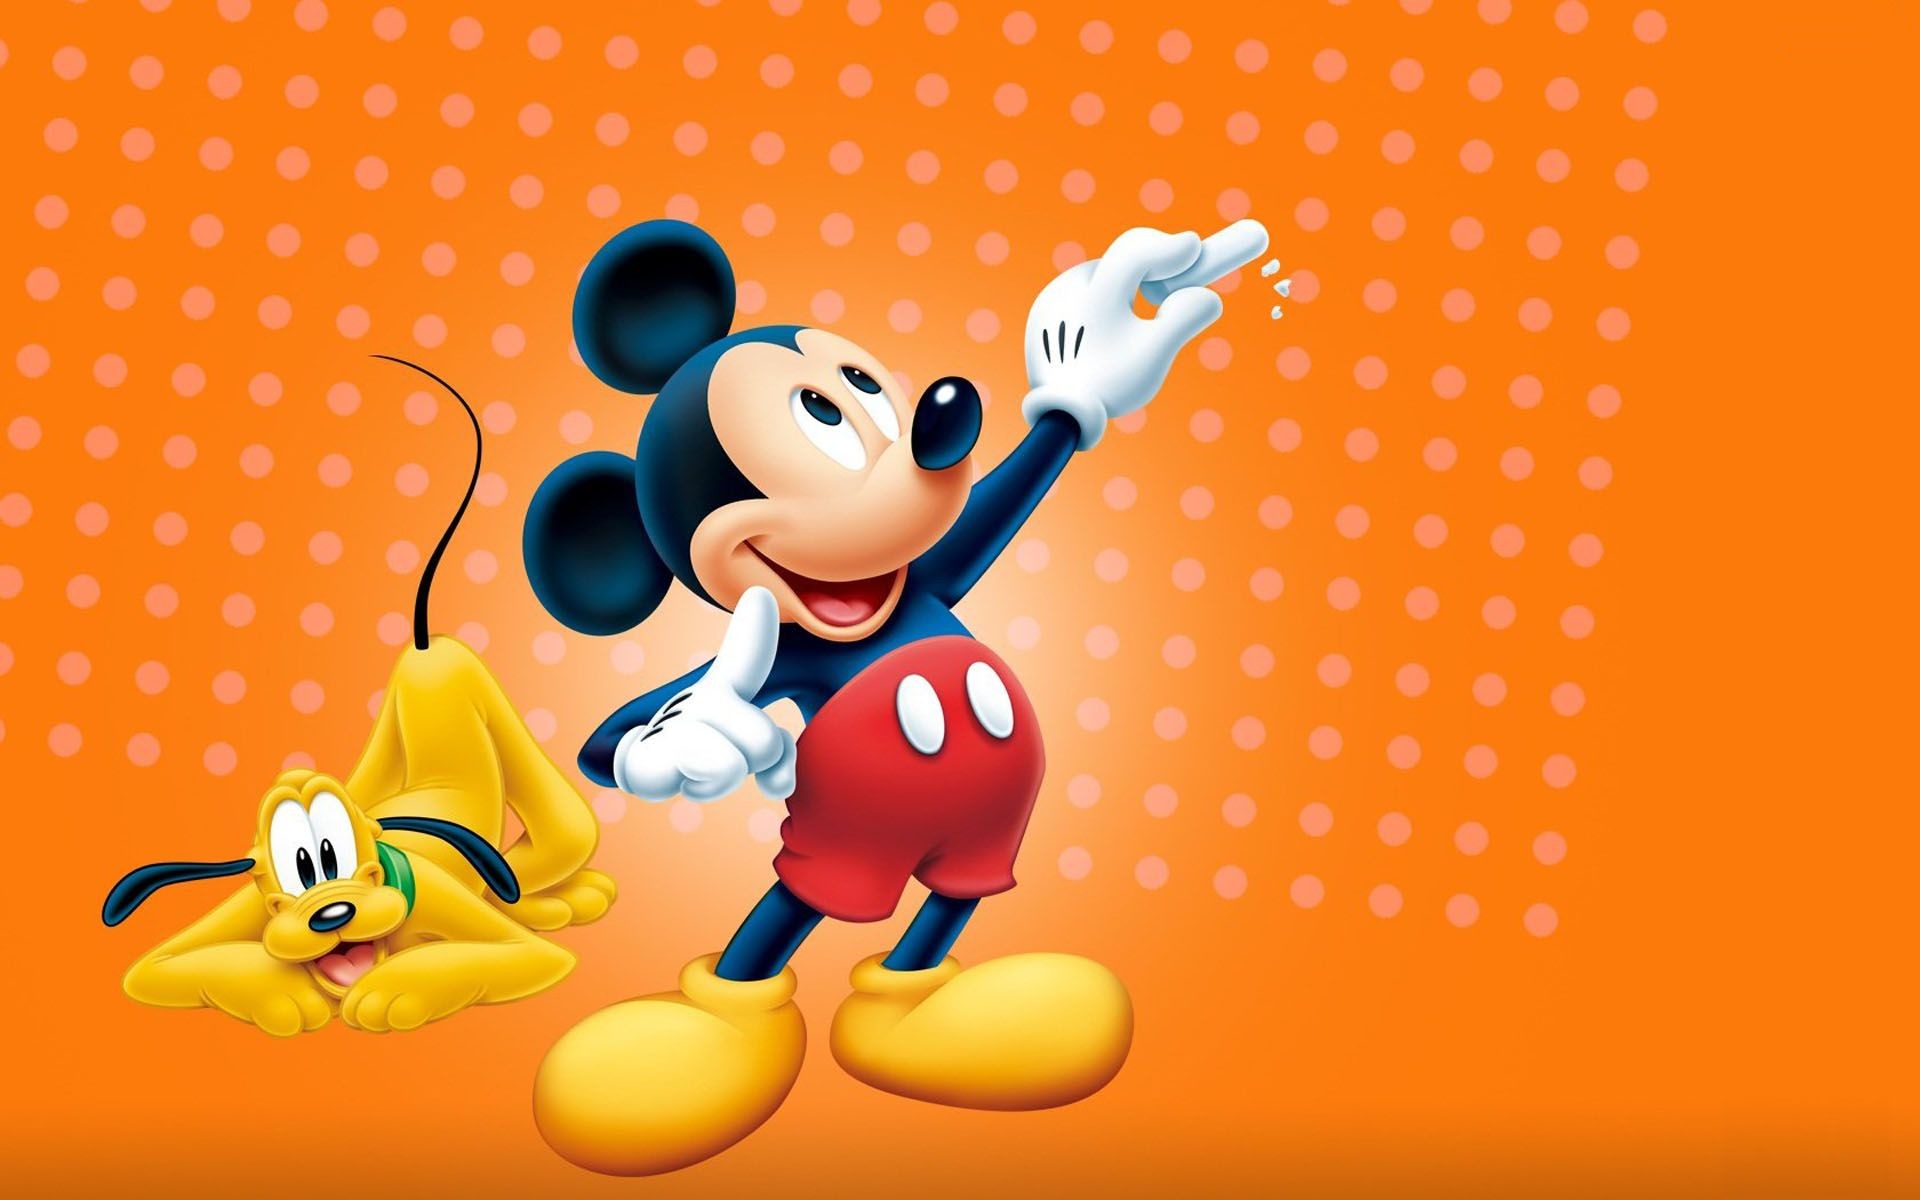 1920x1200 Mickey Mouse HD Images : Get Free top quality Mickey Mouse HD Images for  your desktop